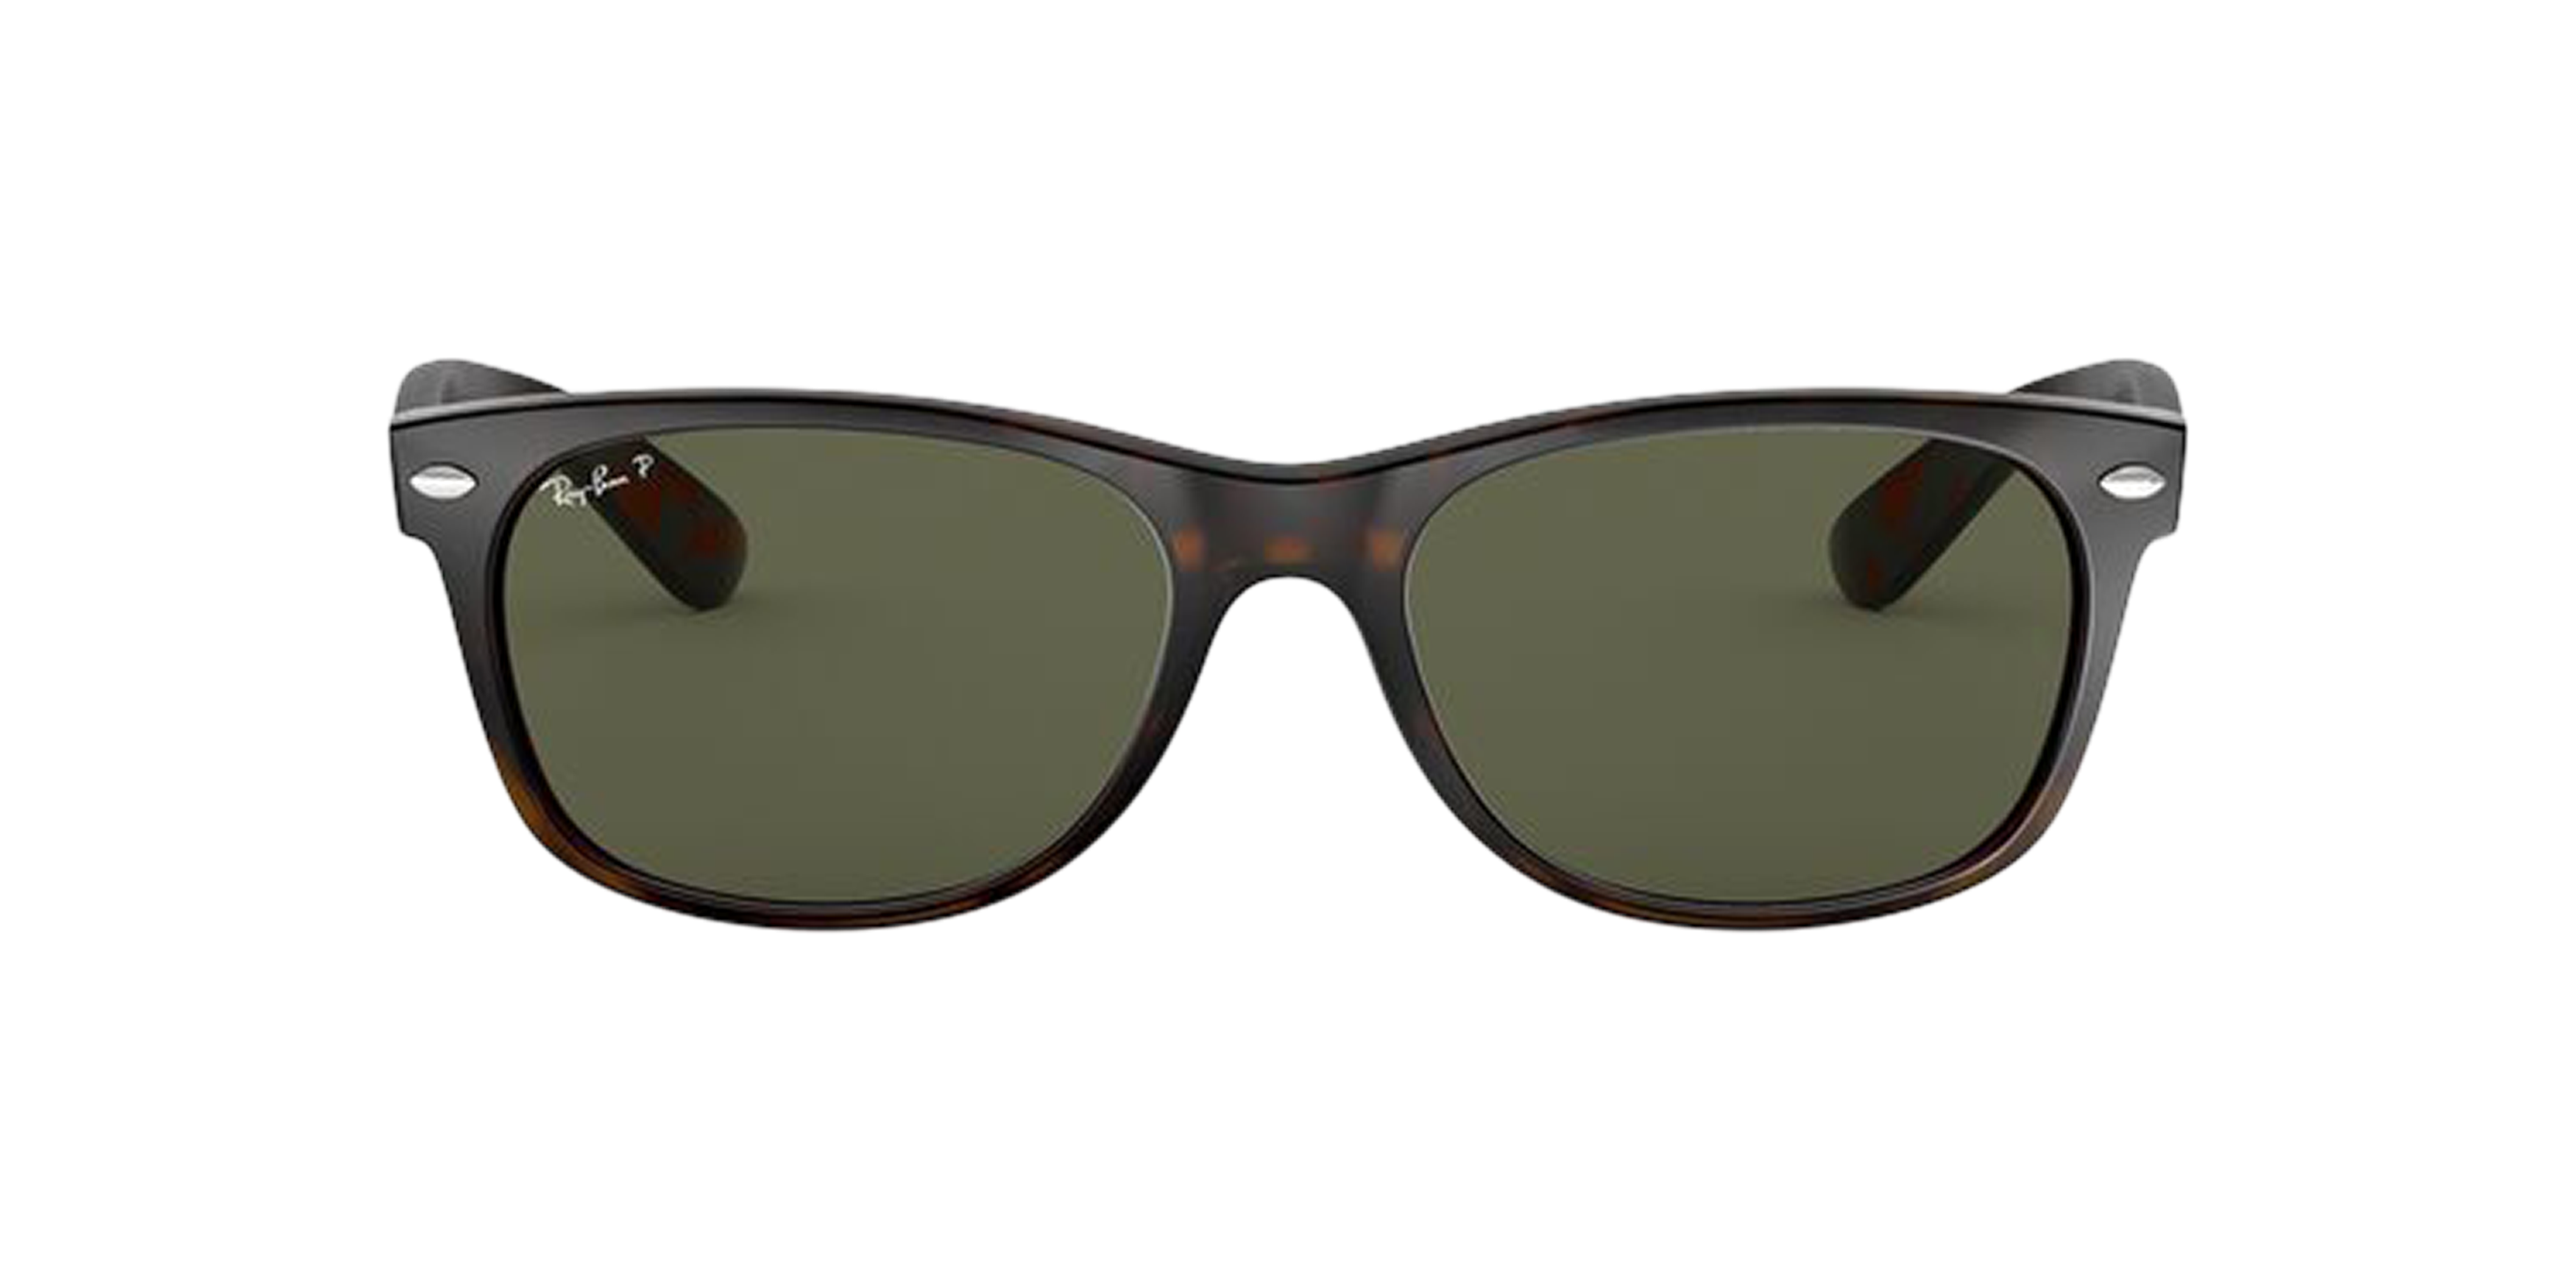 [products.image.front] RAY-BAN RB2132 902/58